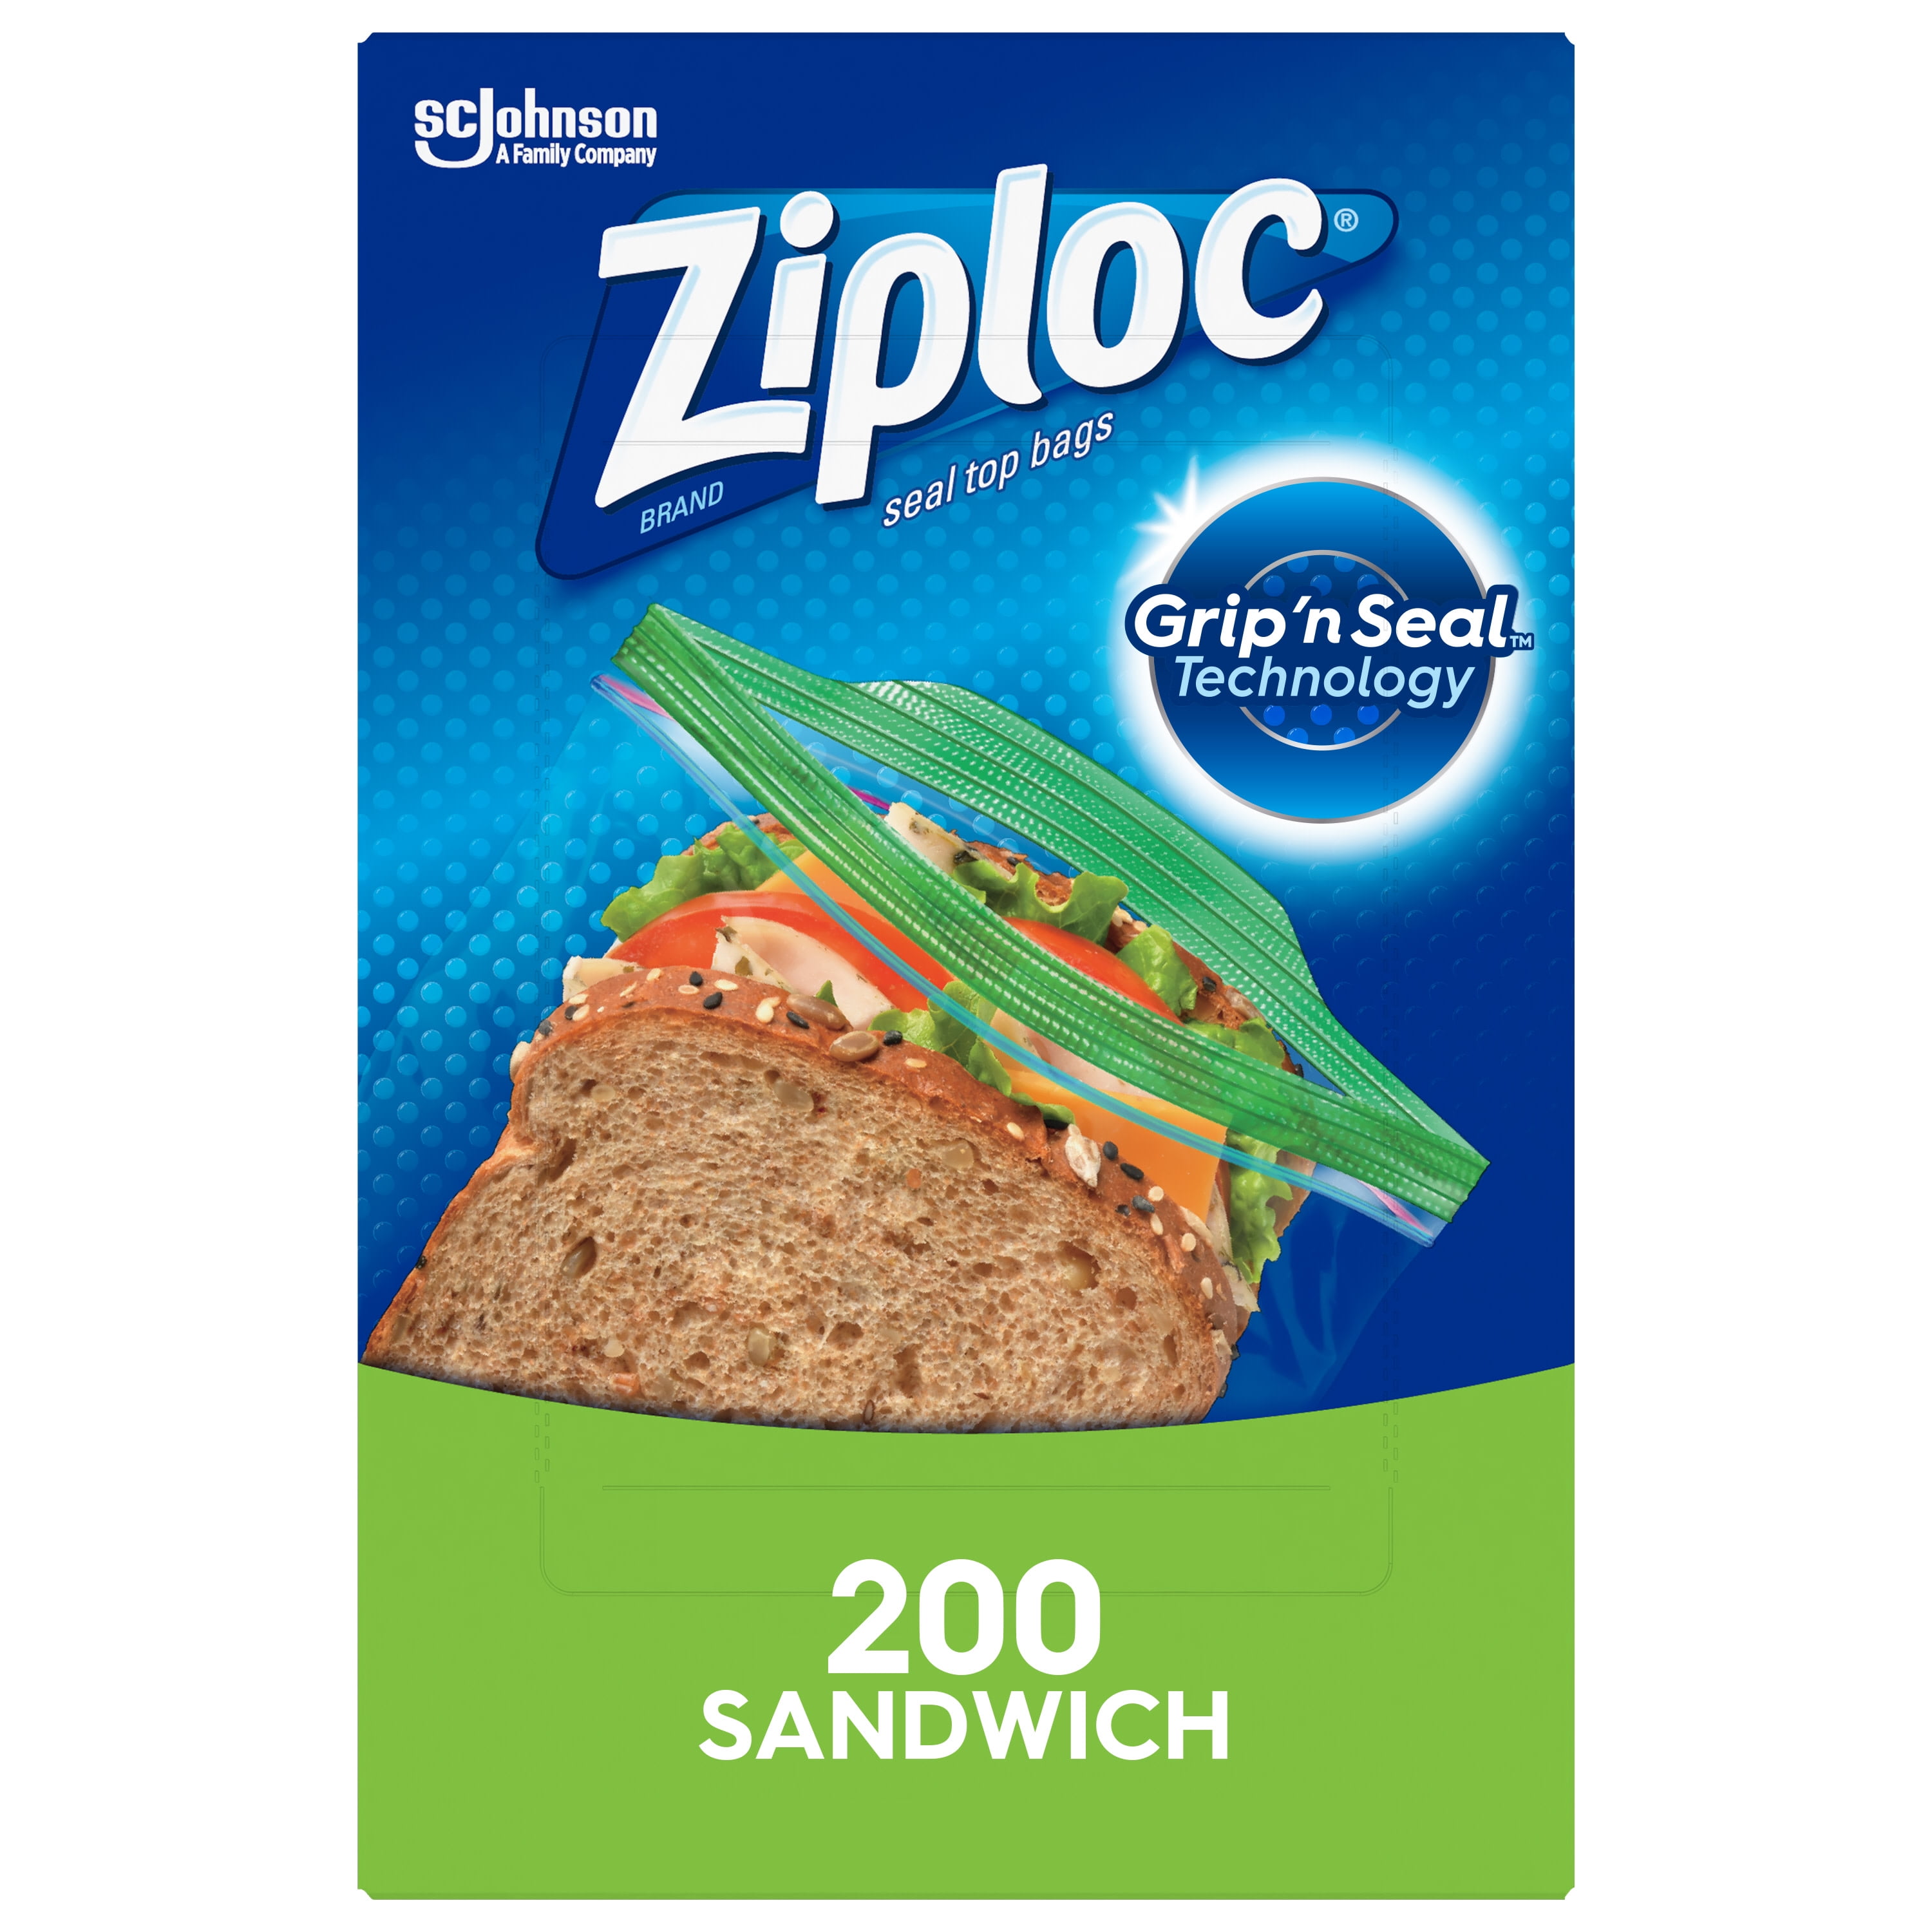 Ziploc® Brand Sandwich Bags with Grip 'n Seal Technology, 200 Count